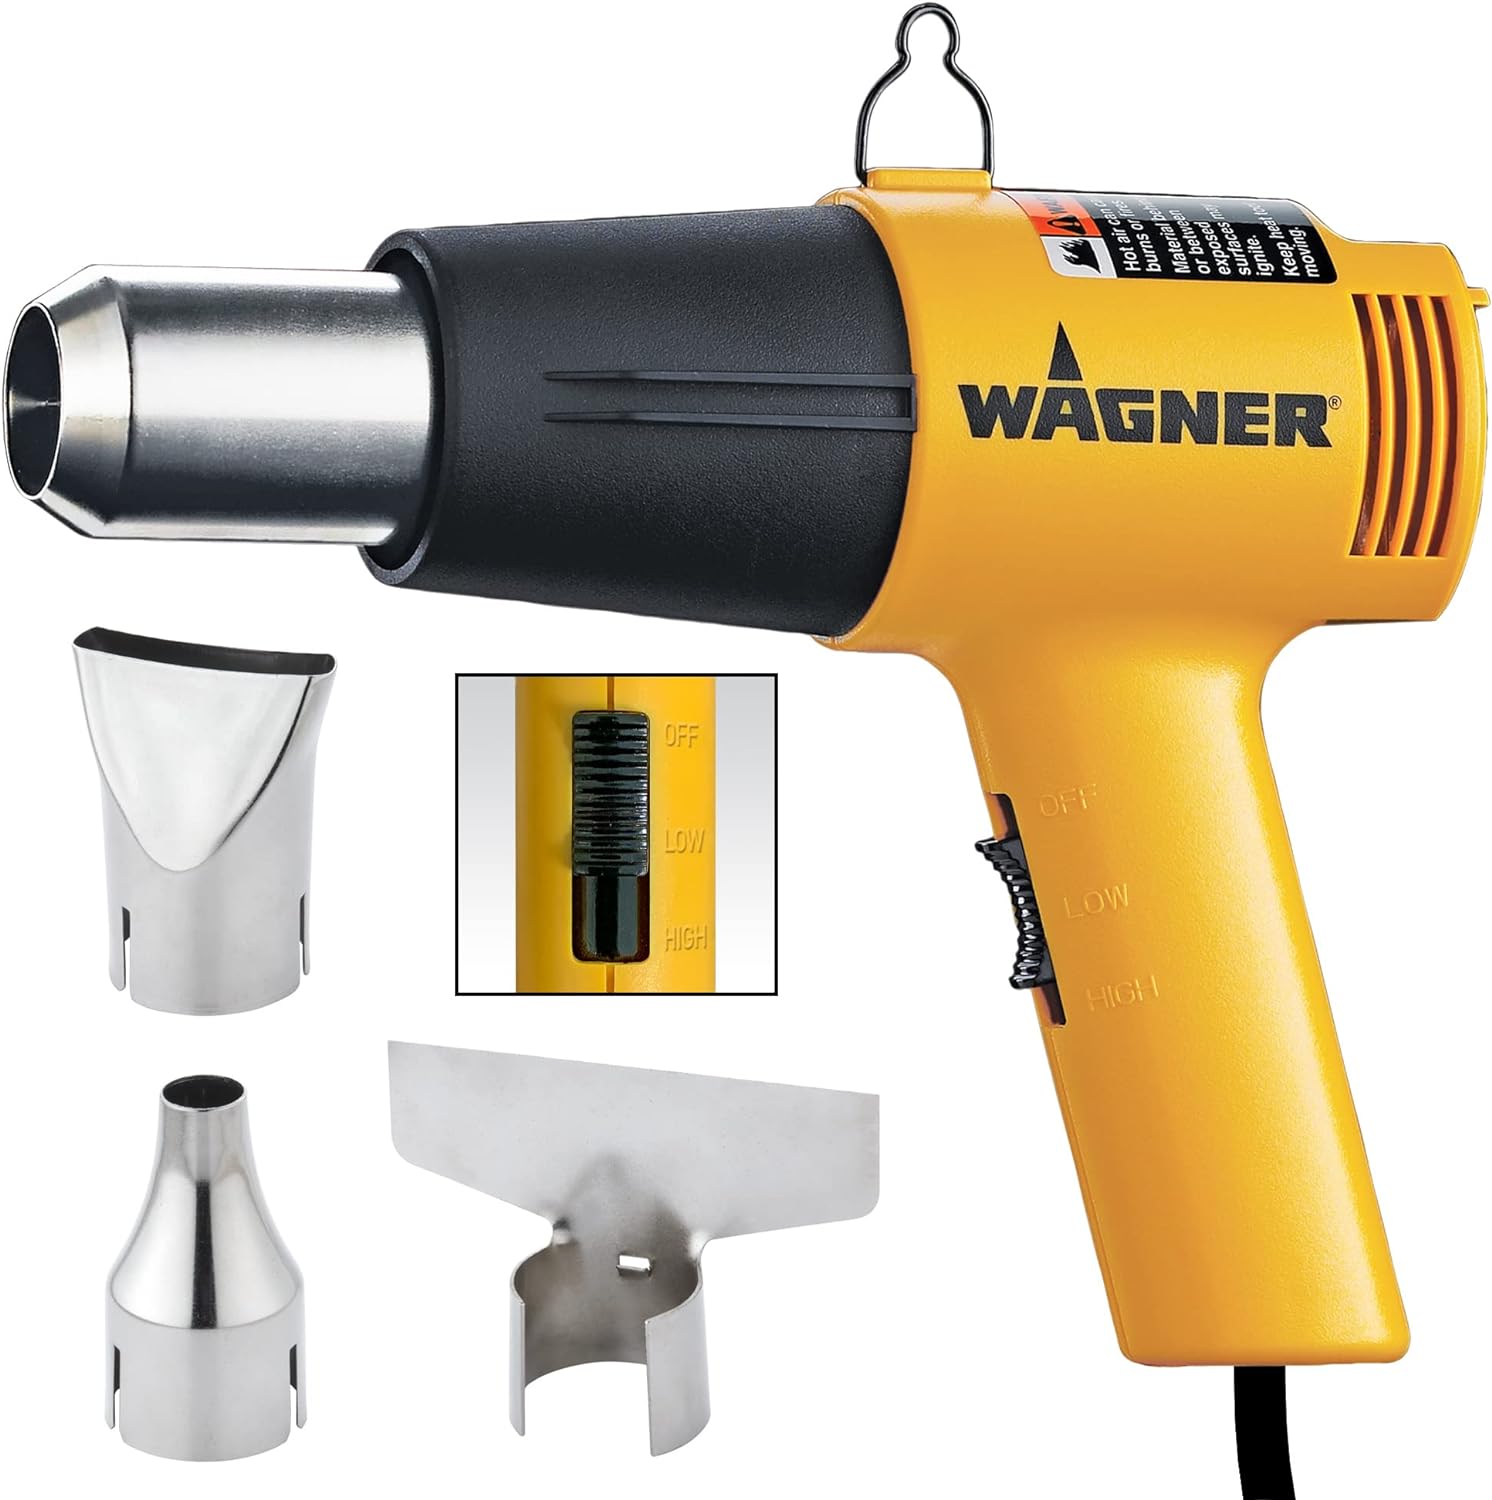 Wagner Heat Gun Kit Wagner Spraytech 2417344 HT1000 With 3 Nozzles Included, 2 Temp Settings 750ᵒF & 1000ᵒF, Great for Shrink Wrap,